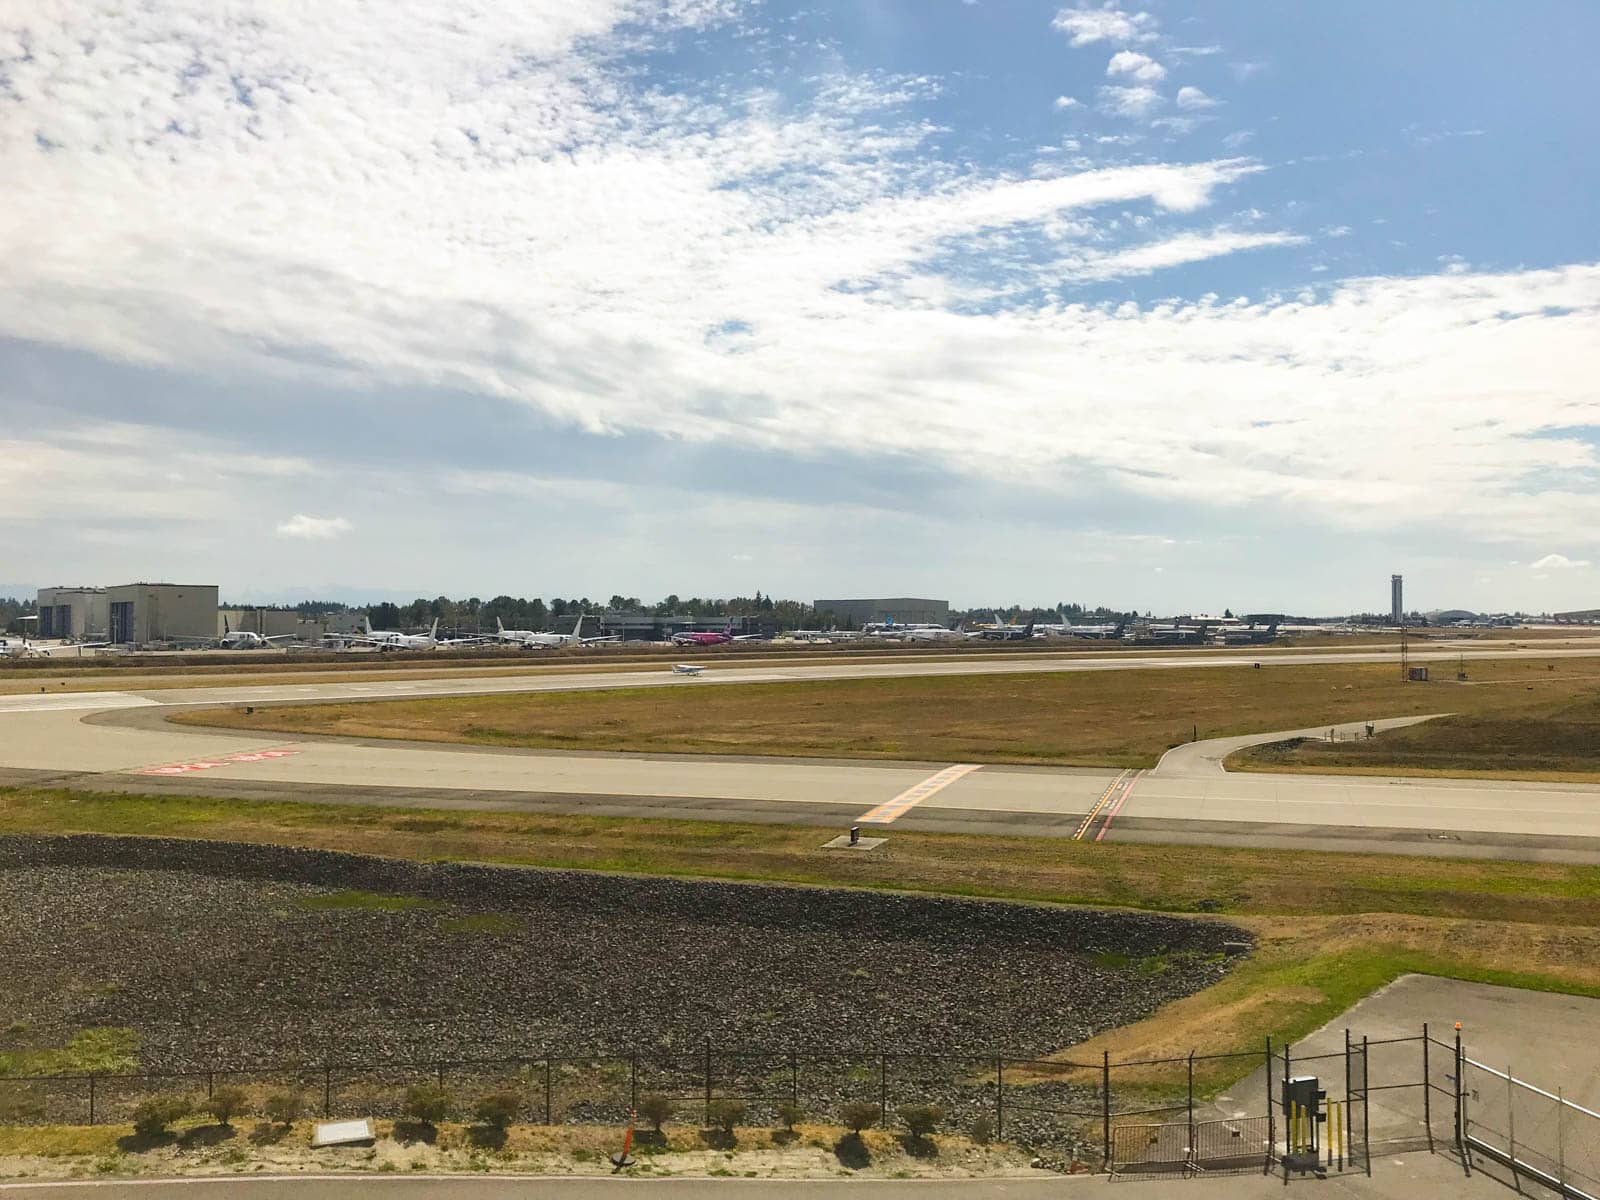 Empty runaways at the Boeing Factory in Seattle. The grass between the runways is a yellow-green colour. Some planes can be seen far off into the distance. The sky is blue with the clouds having created white streaks.